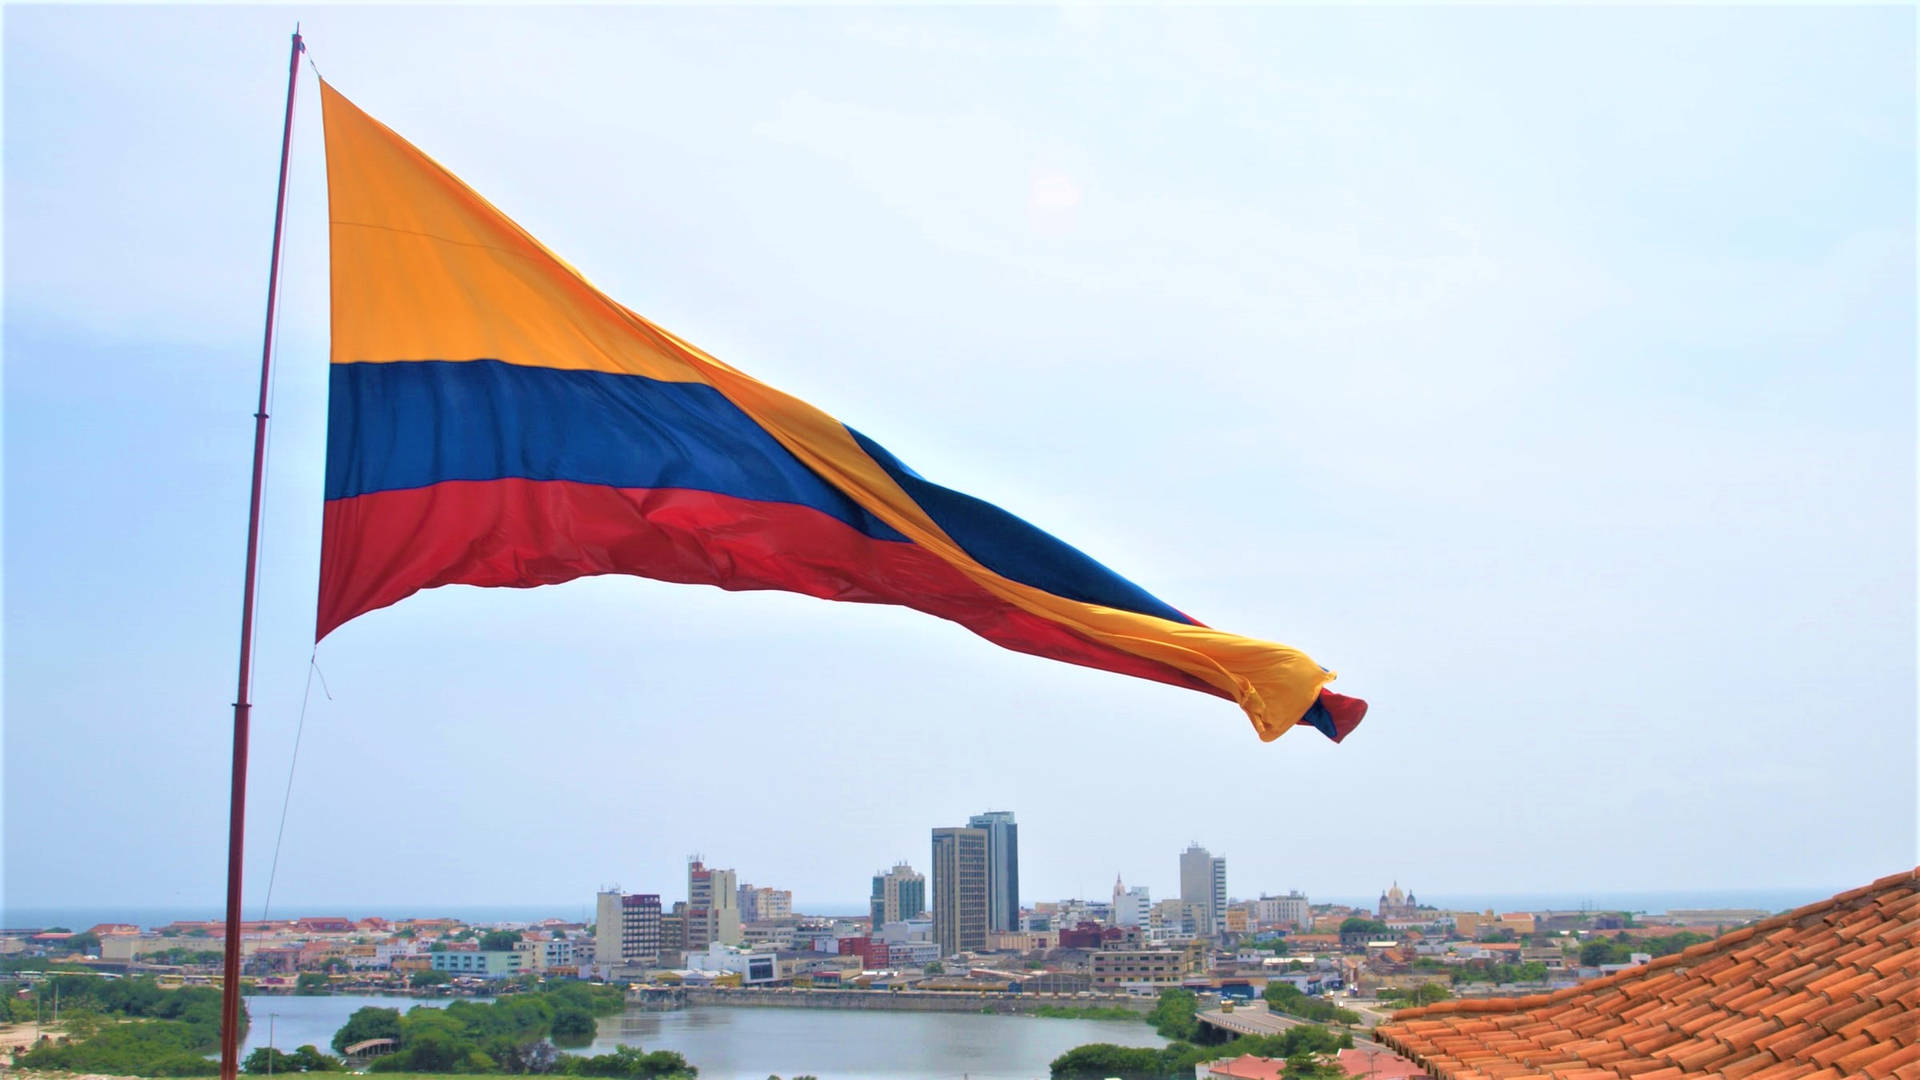 Caption: Vibrant Colombian Flag Waving Proudly Over A Bustling Cityscape.